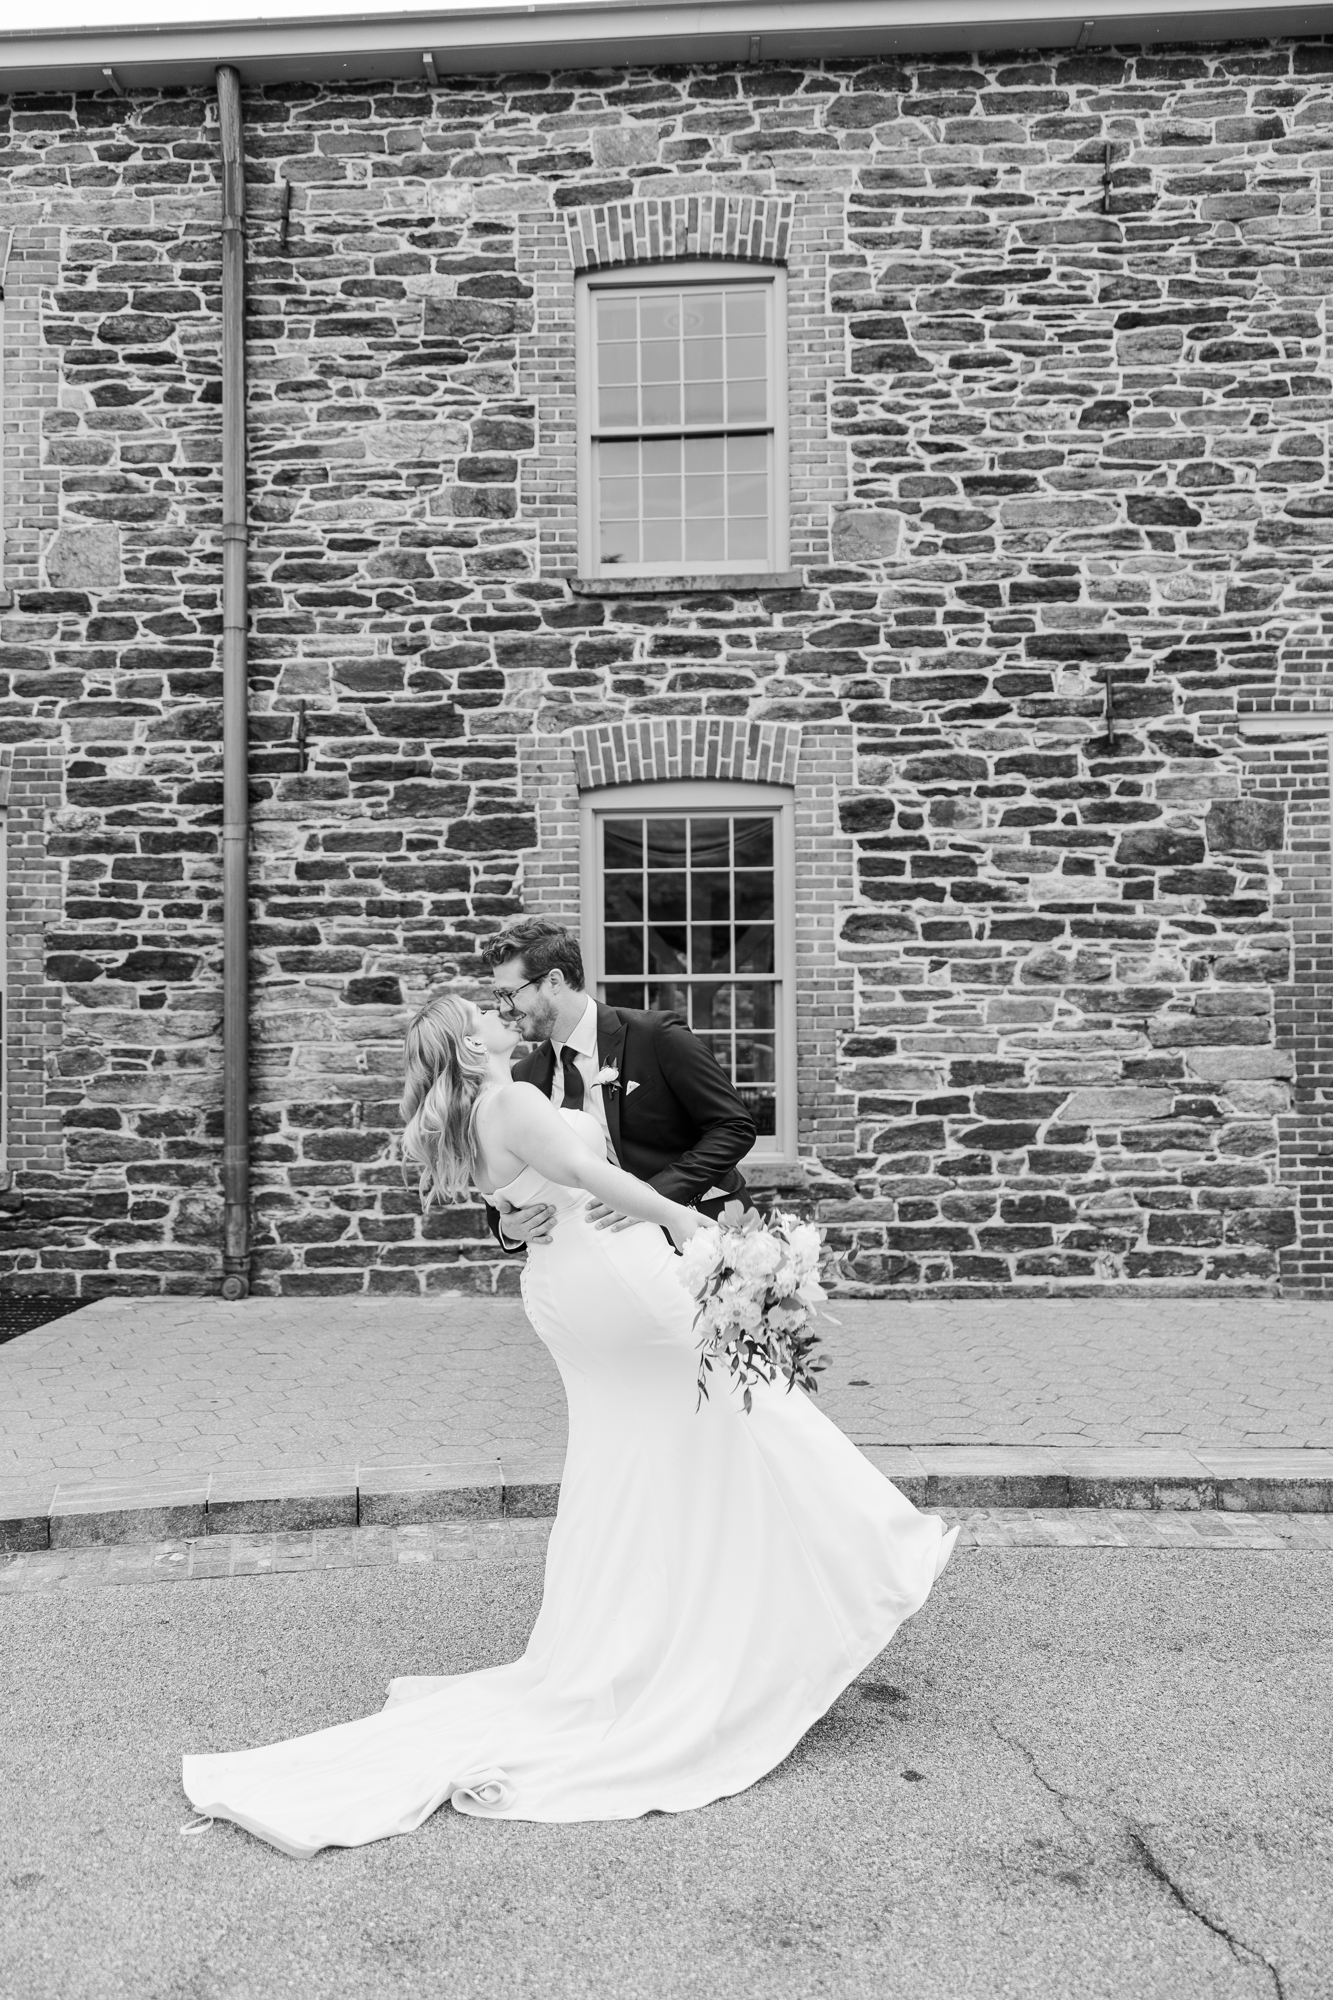 Timeless NYBG Summer Wedding at Stone Mill